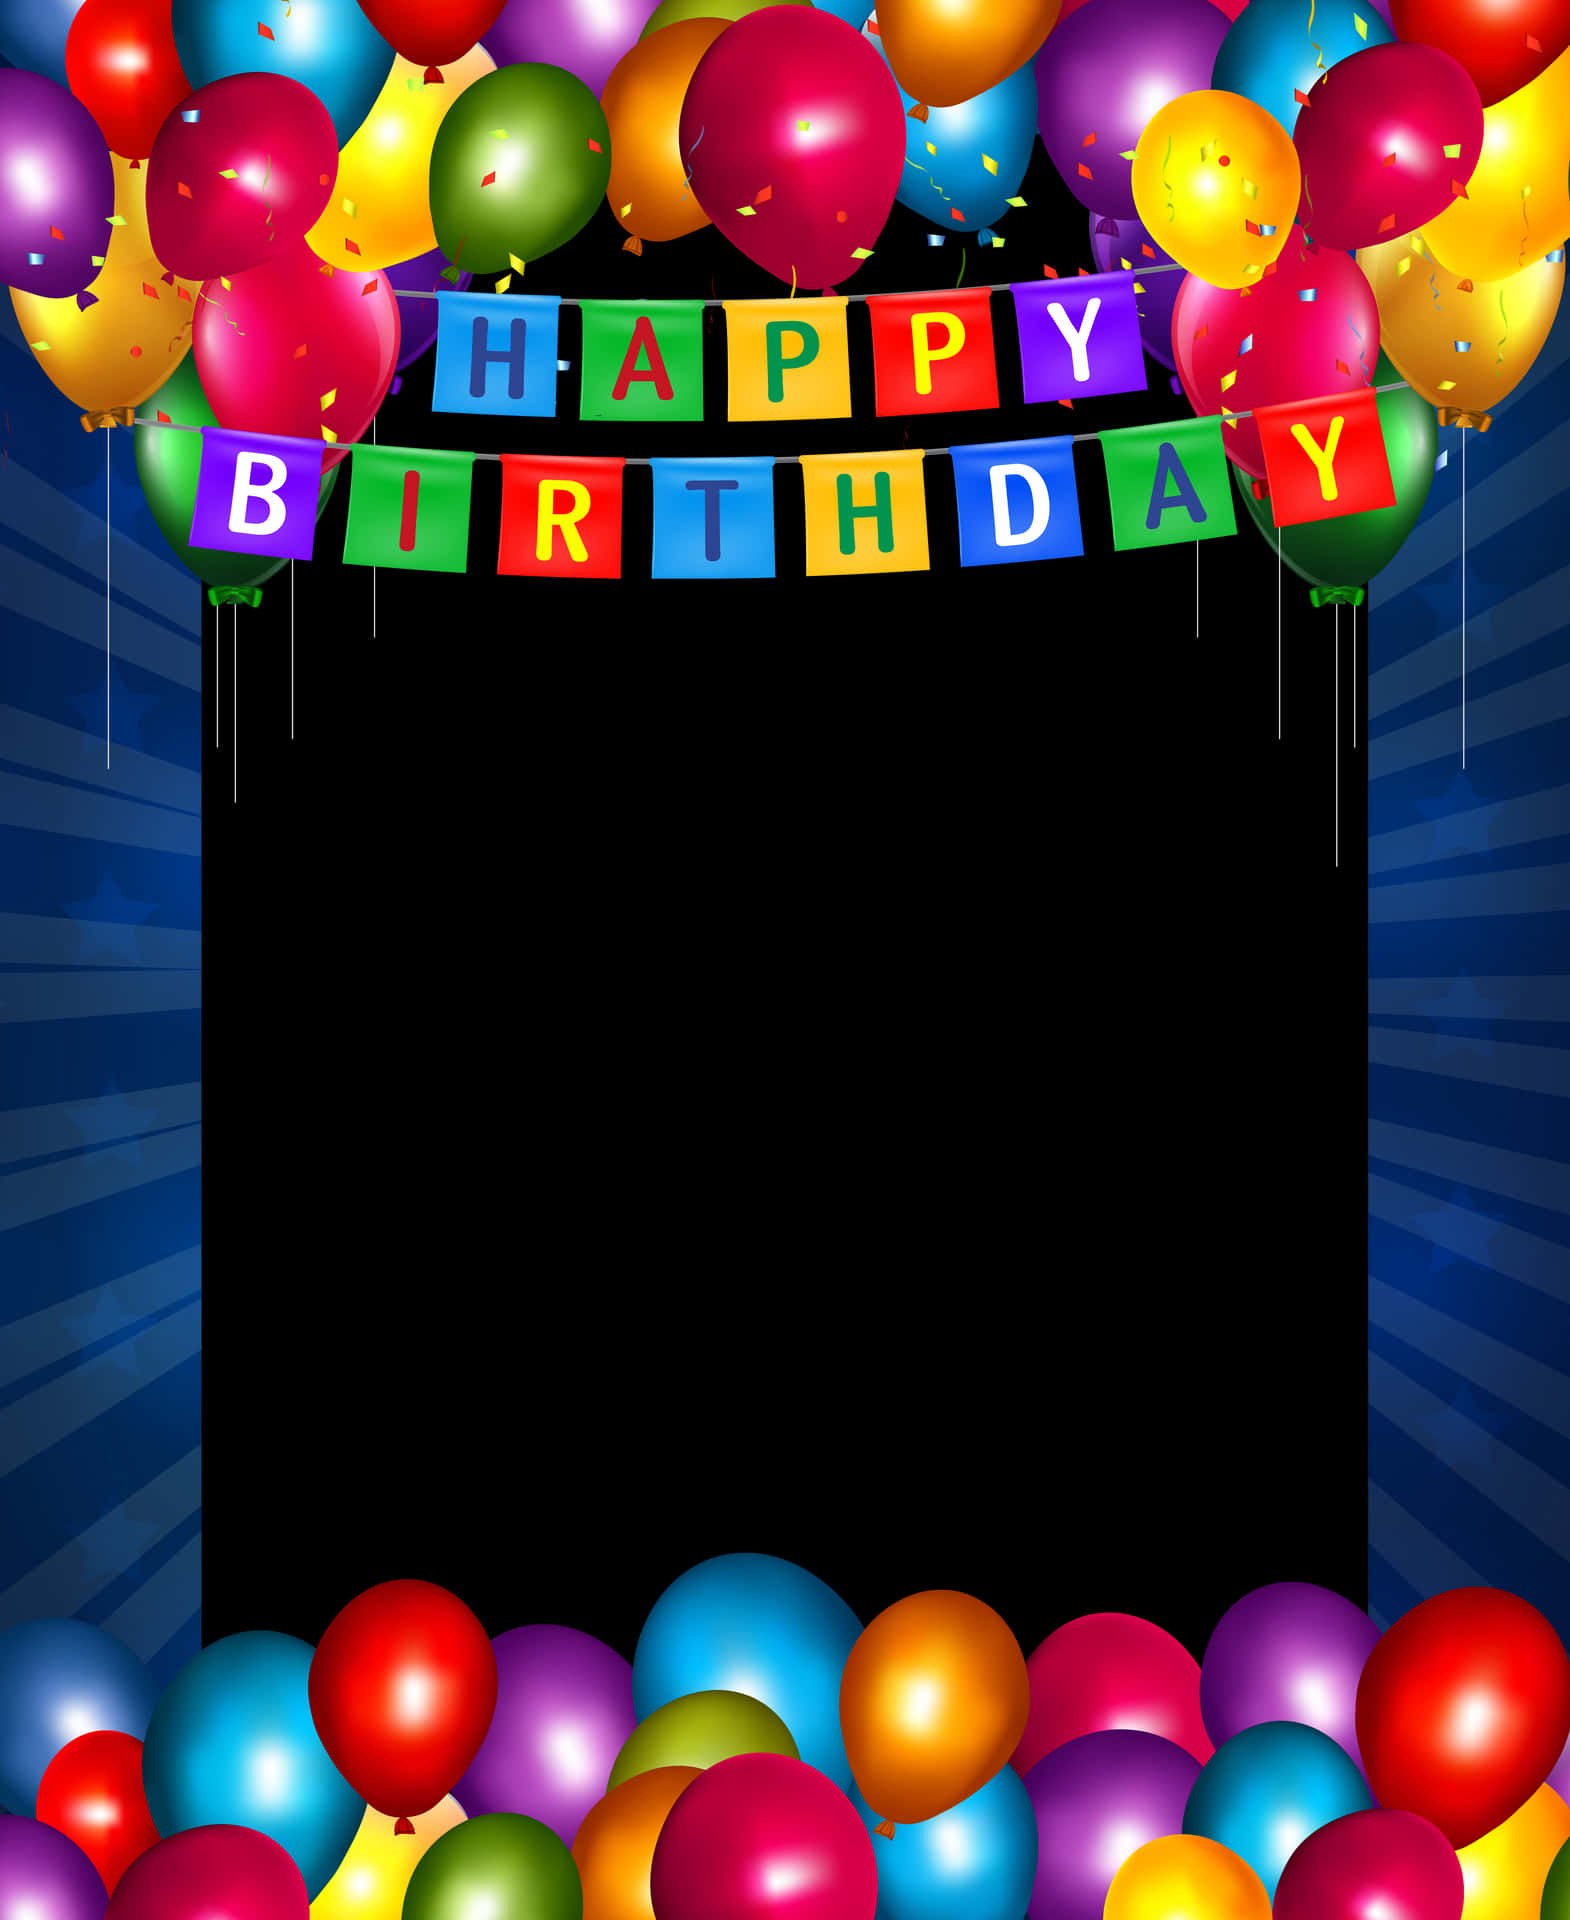 Colorful Birthday Frame PNG